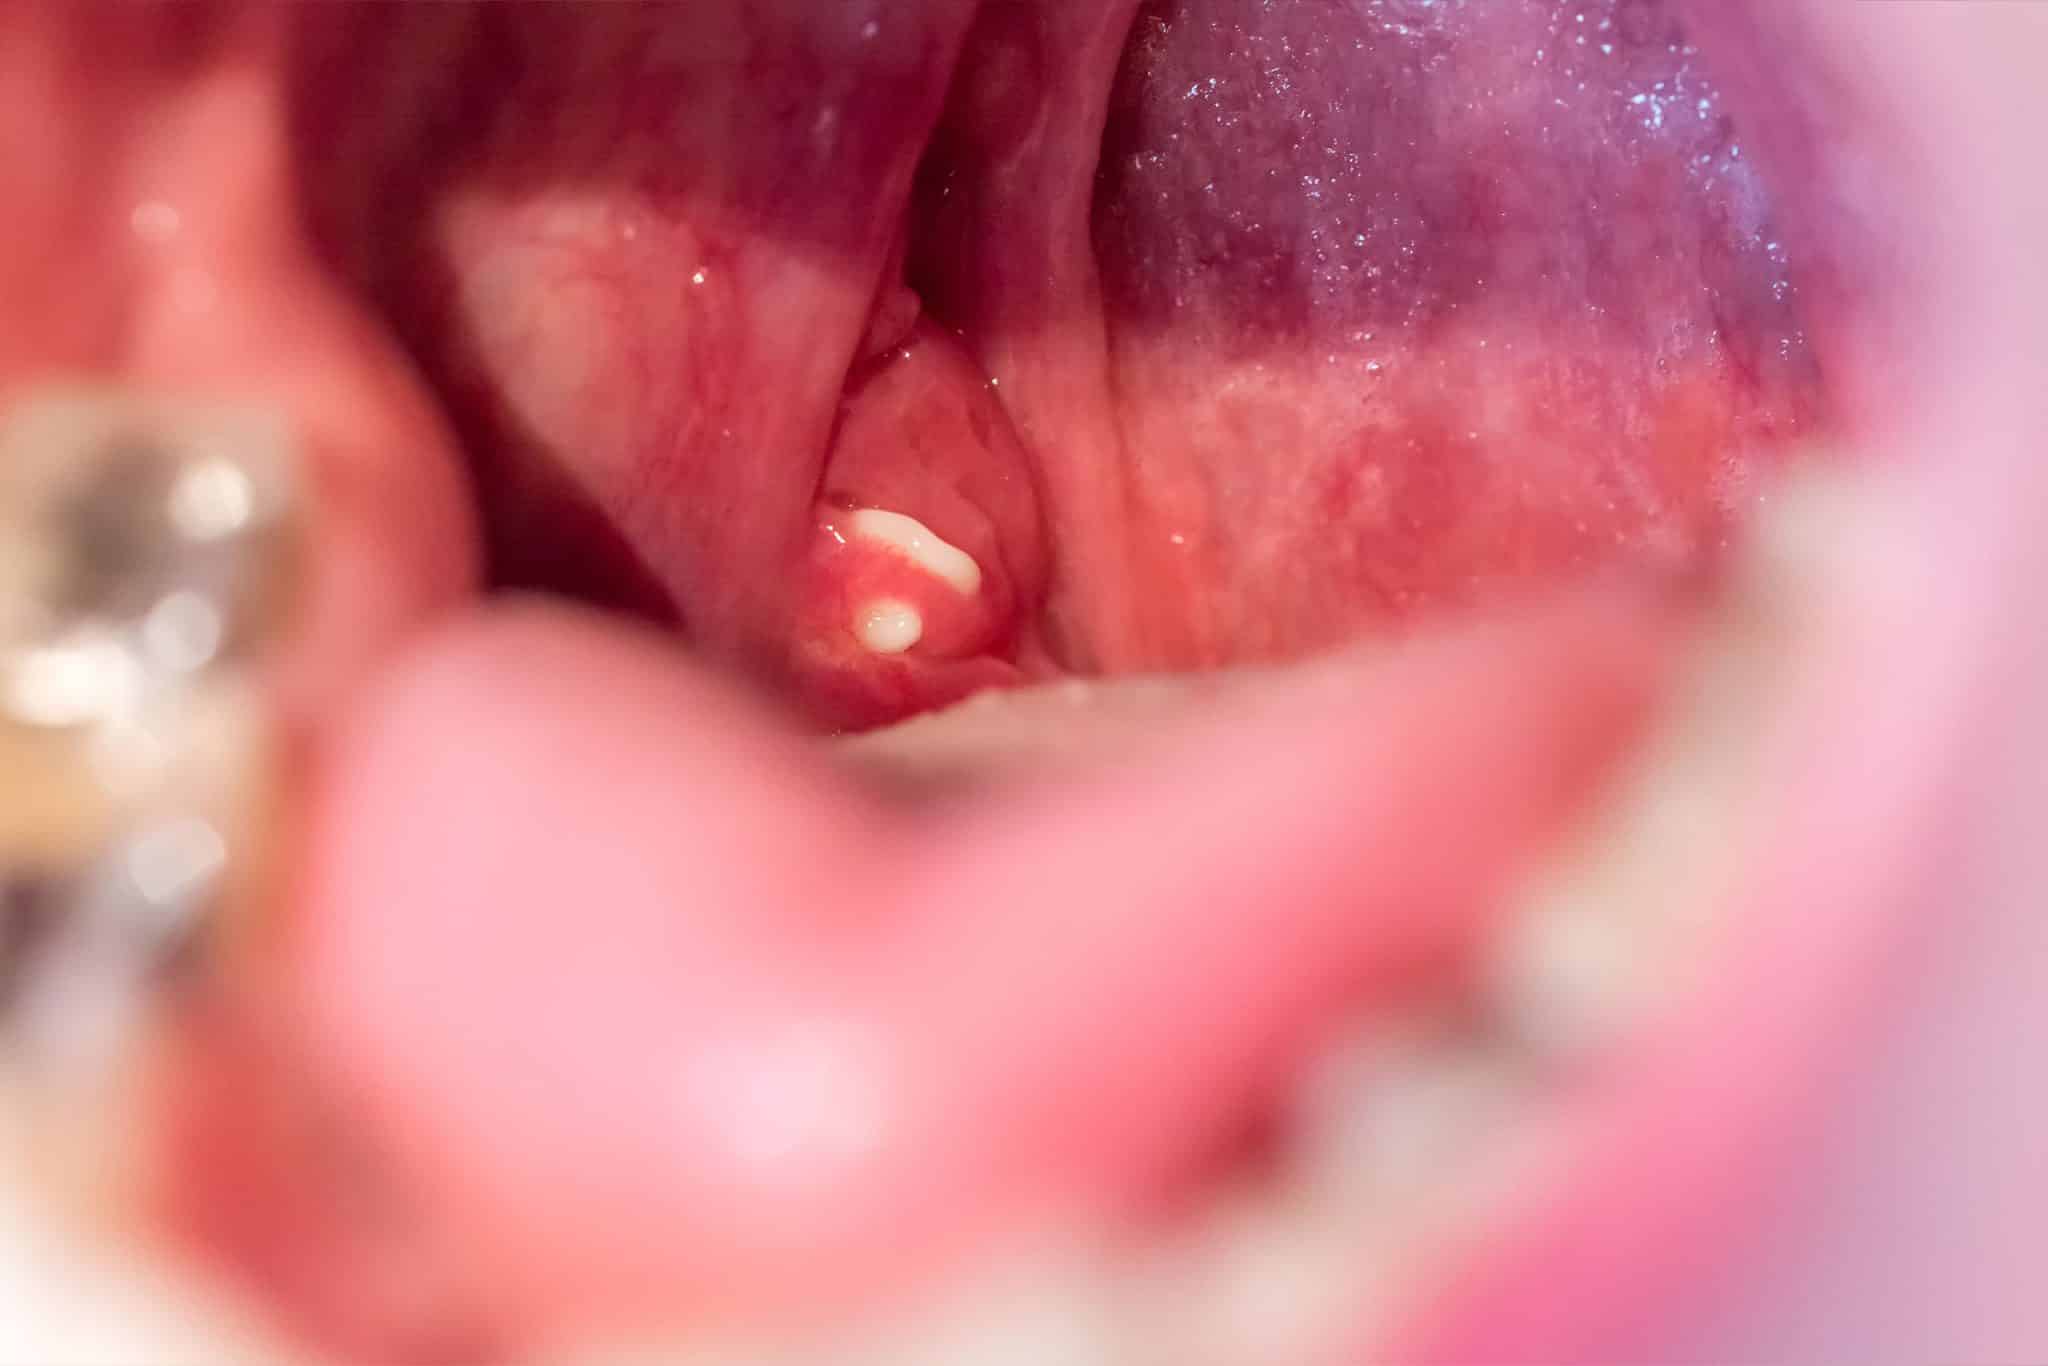 A photo of a tonsil stone inside of a mouth